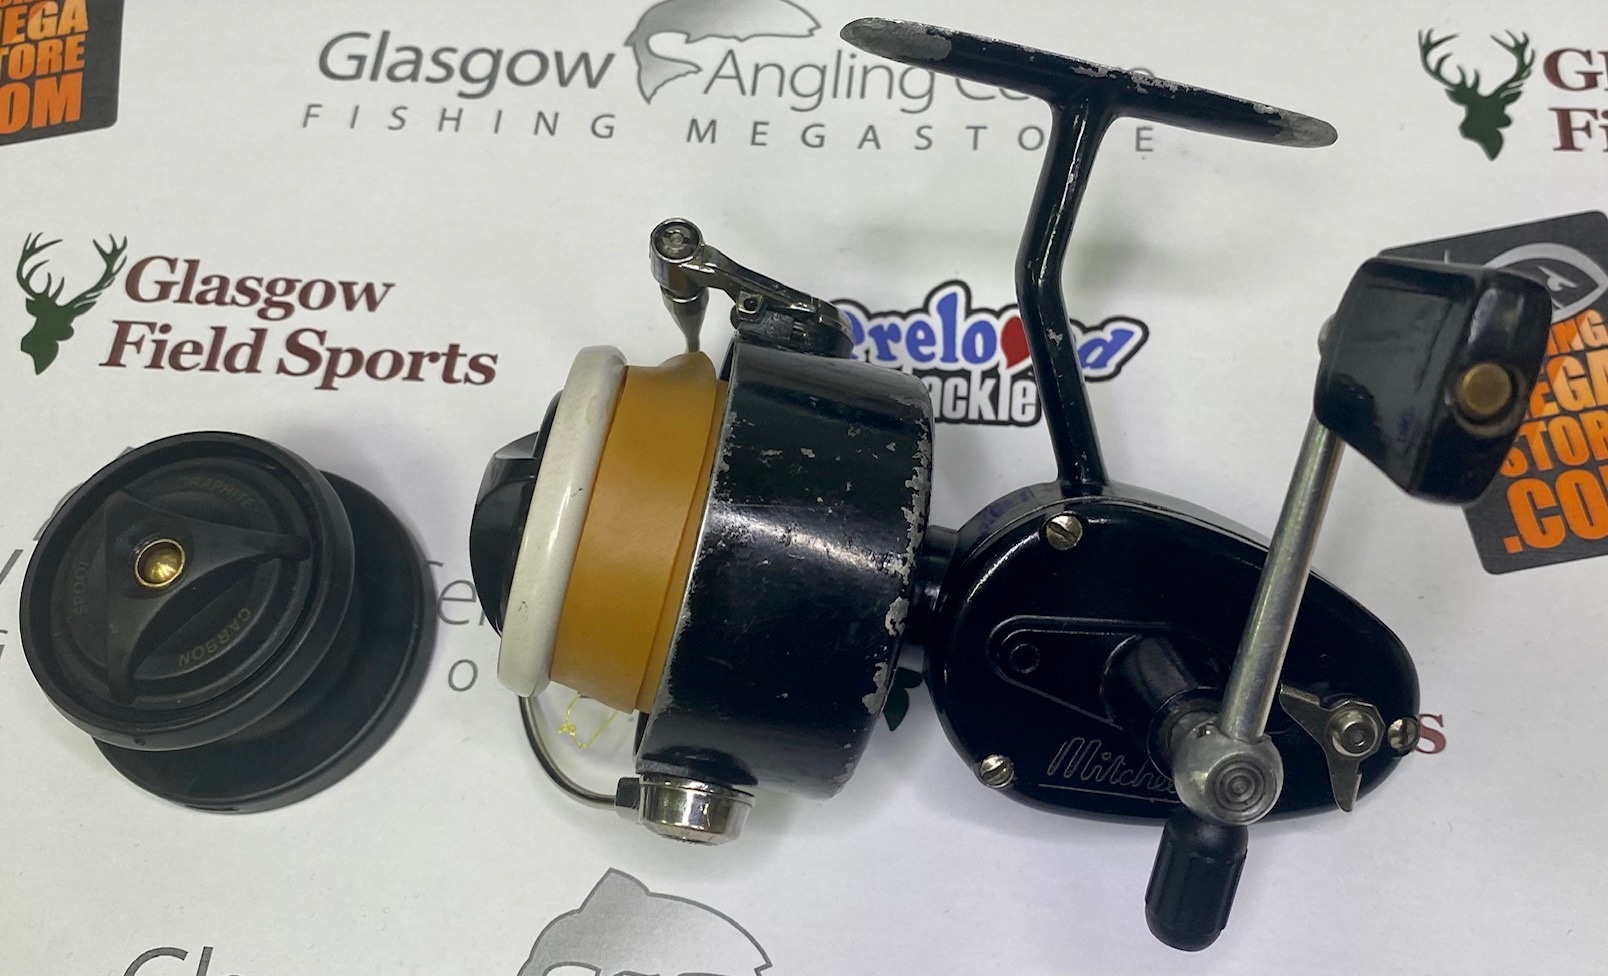 https://cdn.fishingmegastore.com/hires/mitchell/preloved-mitchell-300-reel-made-in-france-with-spare-spool-no-box-used-sh-6e02f.jpg